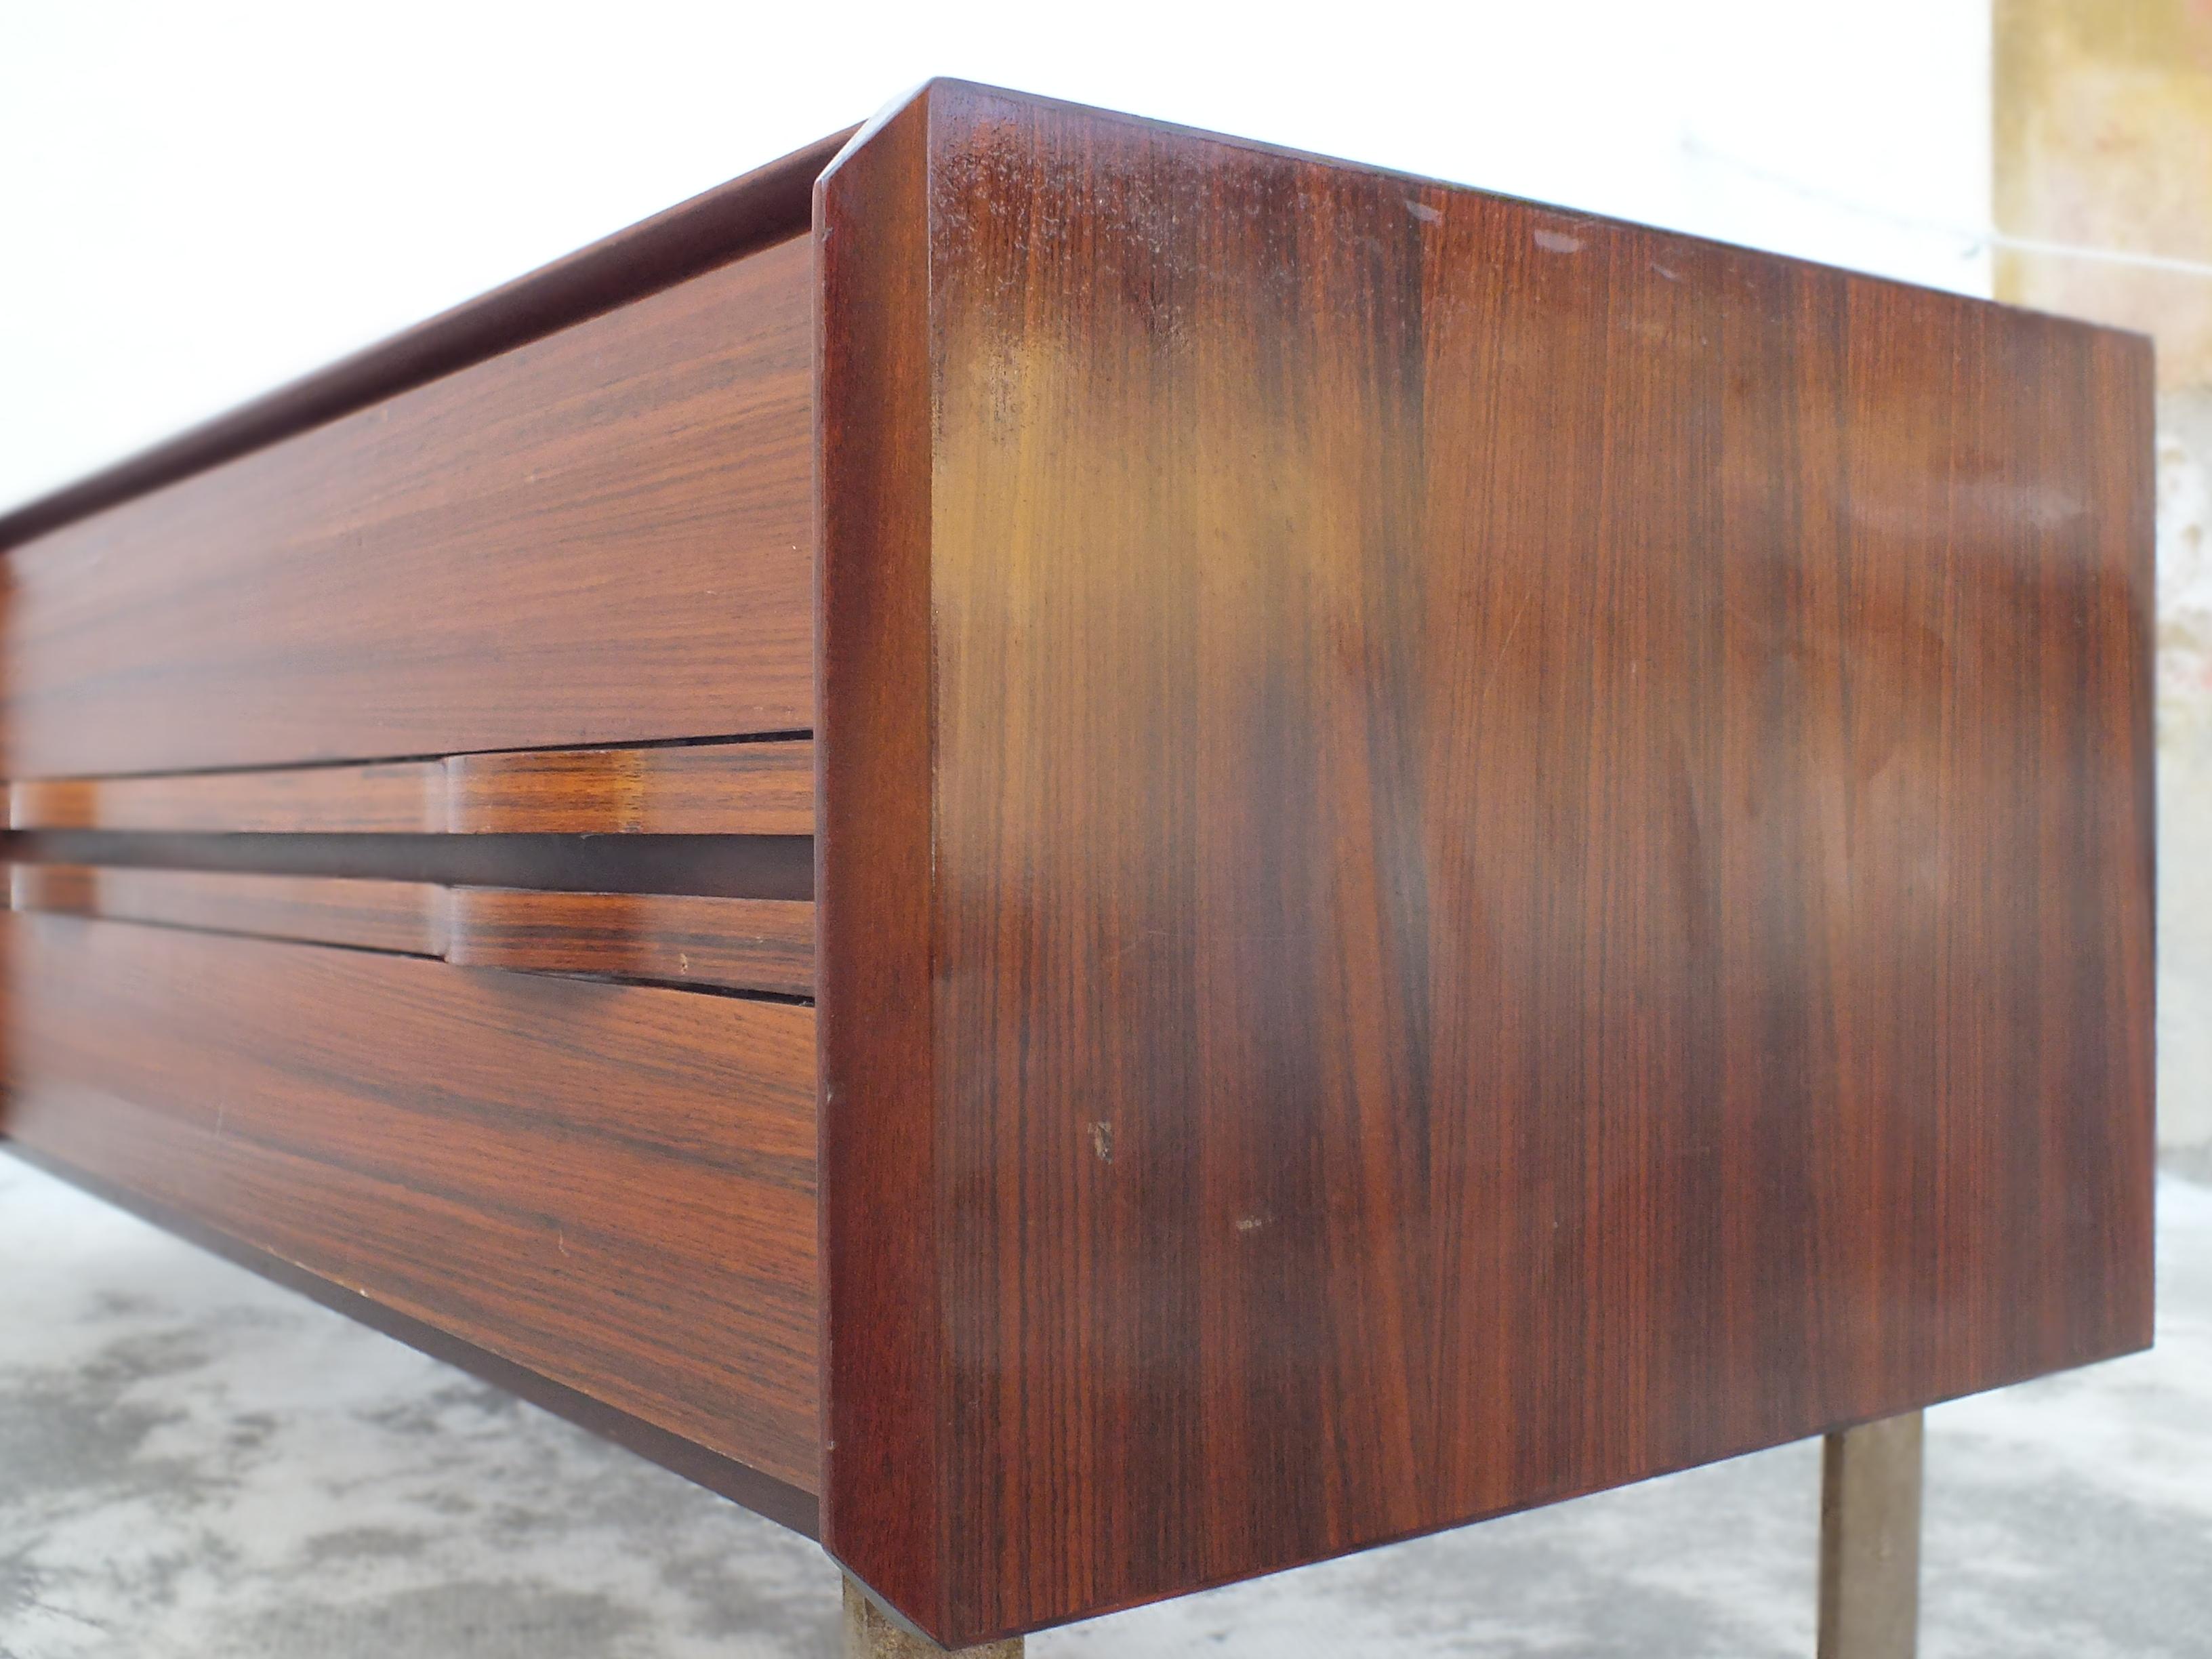 La Permanente meuble Cantu' Italy  probable Frattini Gianfranco design minimalist sideboard with only the inferior and elegant part, good condition with sign the time in the wood